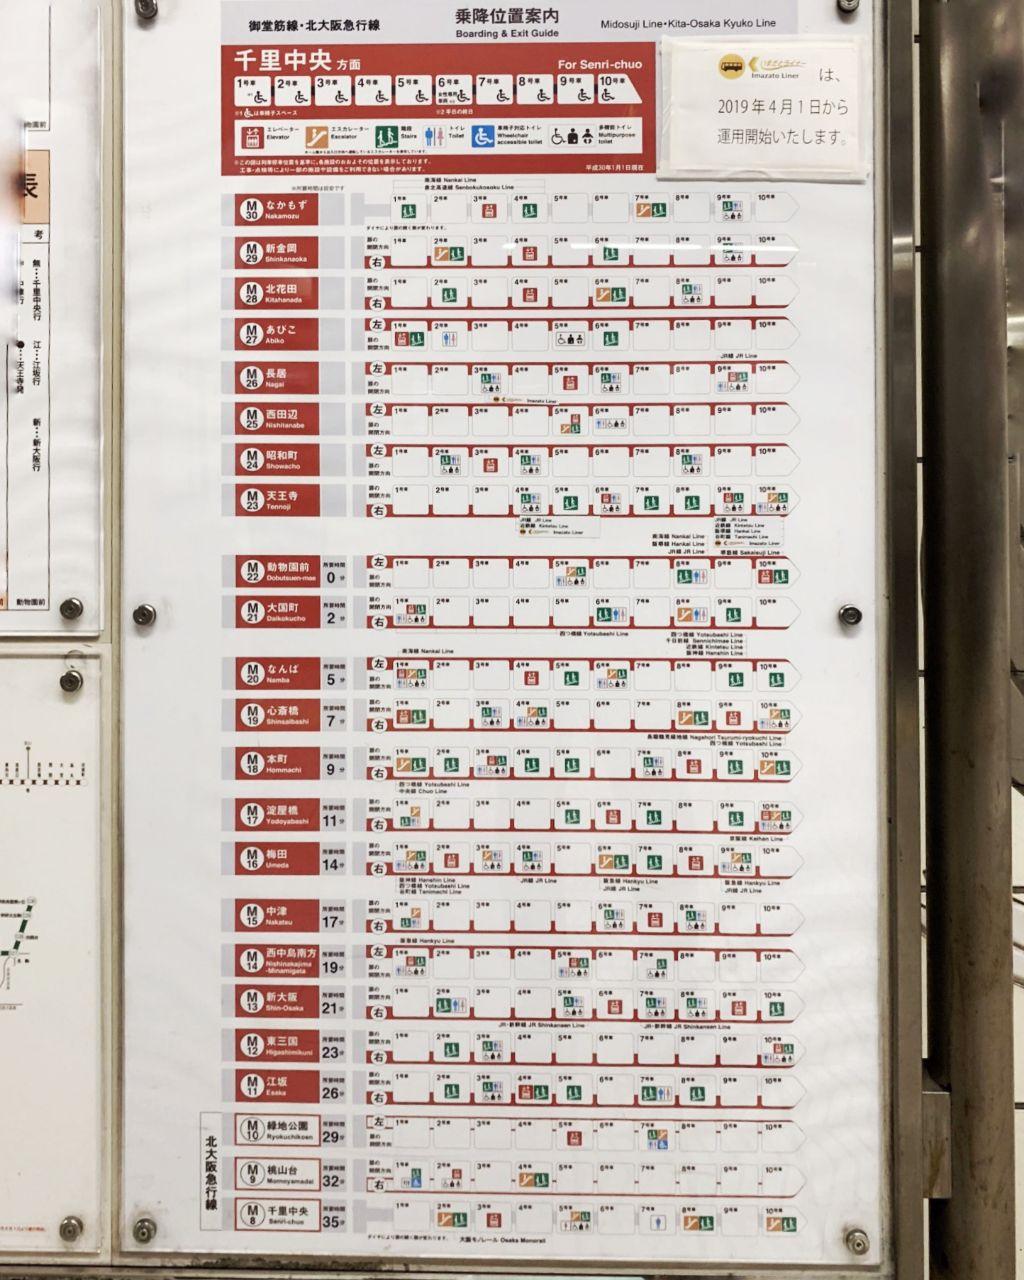 Boarding and Exit Guide in Tokyo trains stations